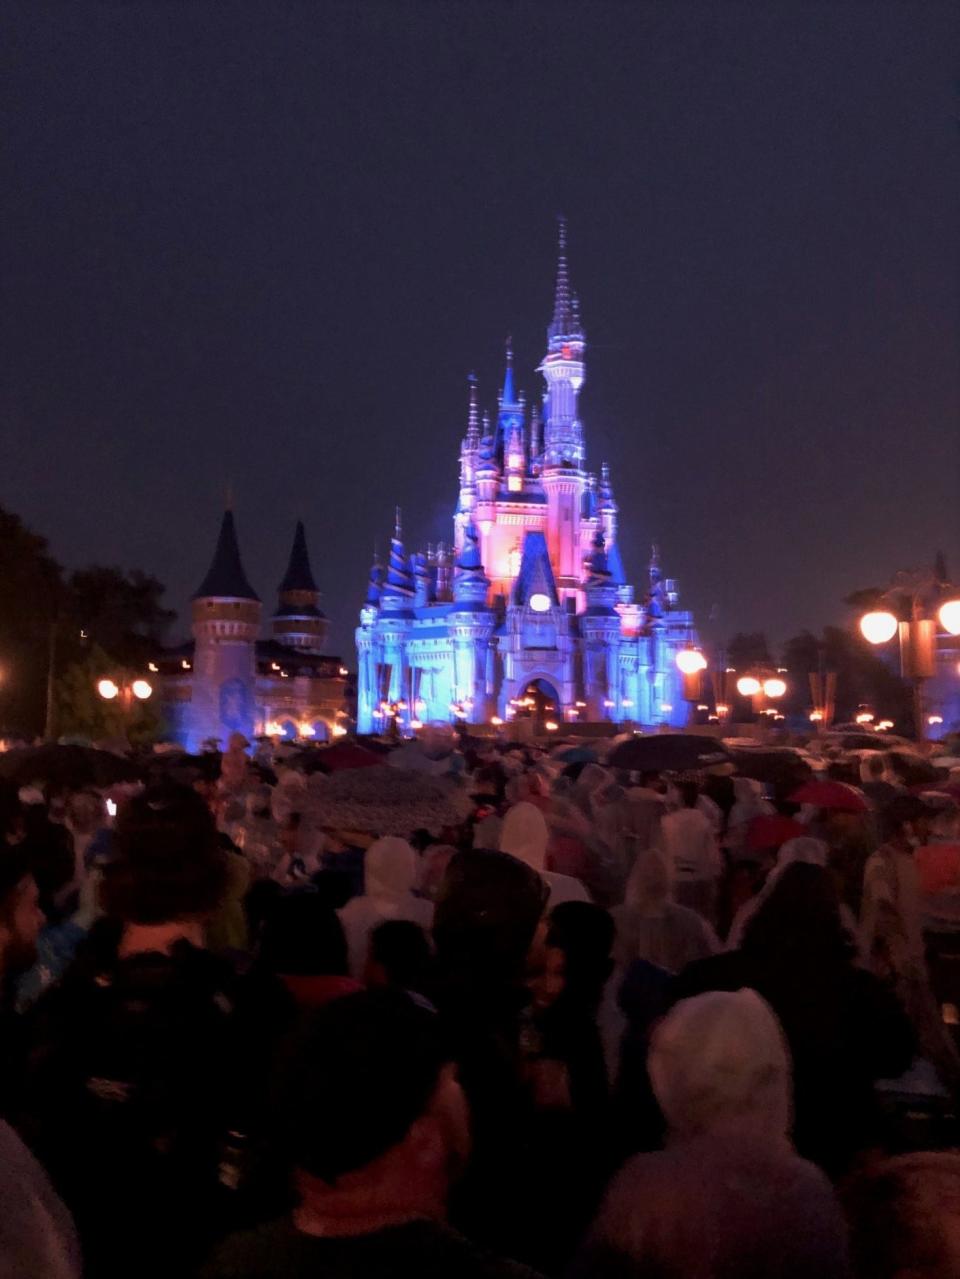 A big crowd gathers at Magic Kingdom to watch the first fireworks show since March 2020. The Walt Disney World parks closed for almost four monnths due to COVID-19 but didn't bring back the fireworks at Magic Kingdom and Epcot until July 1, 2021.